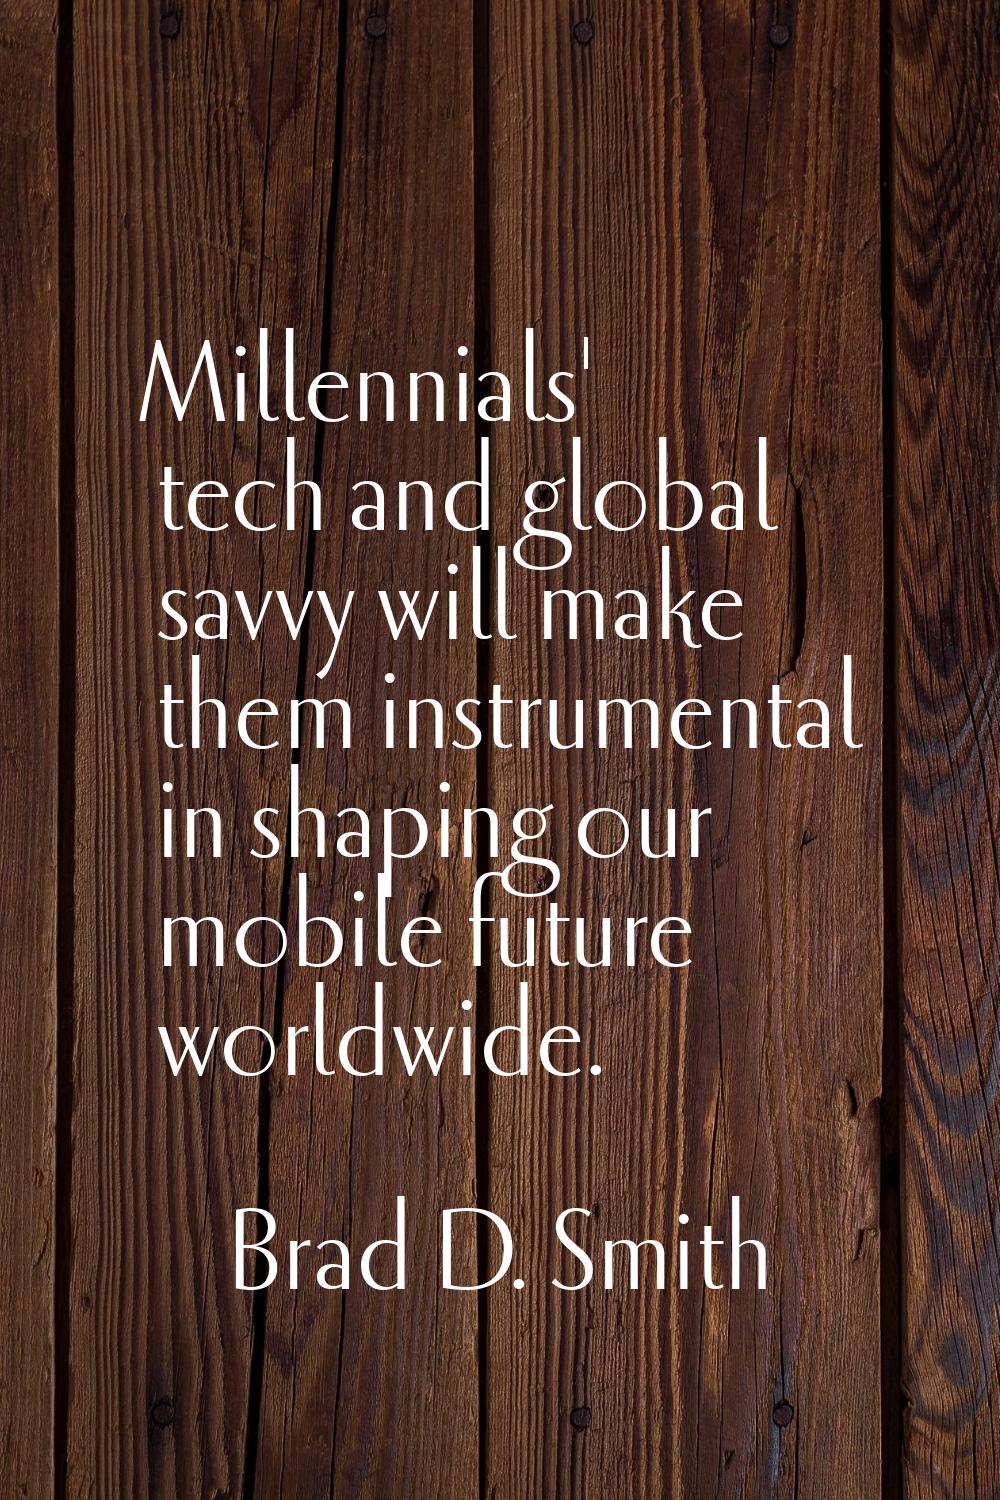 Millennials' tech and global savvy will make them instrumental in shaping our mobile future worldwi